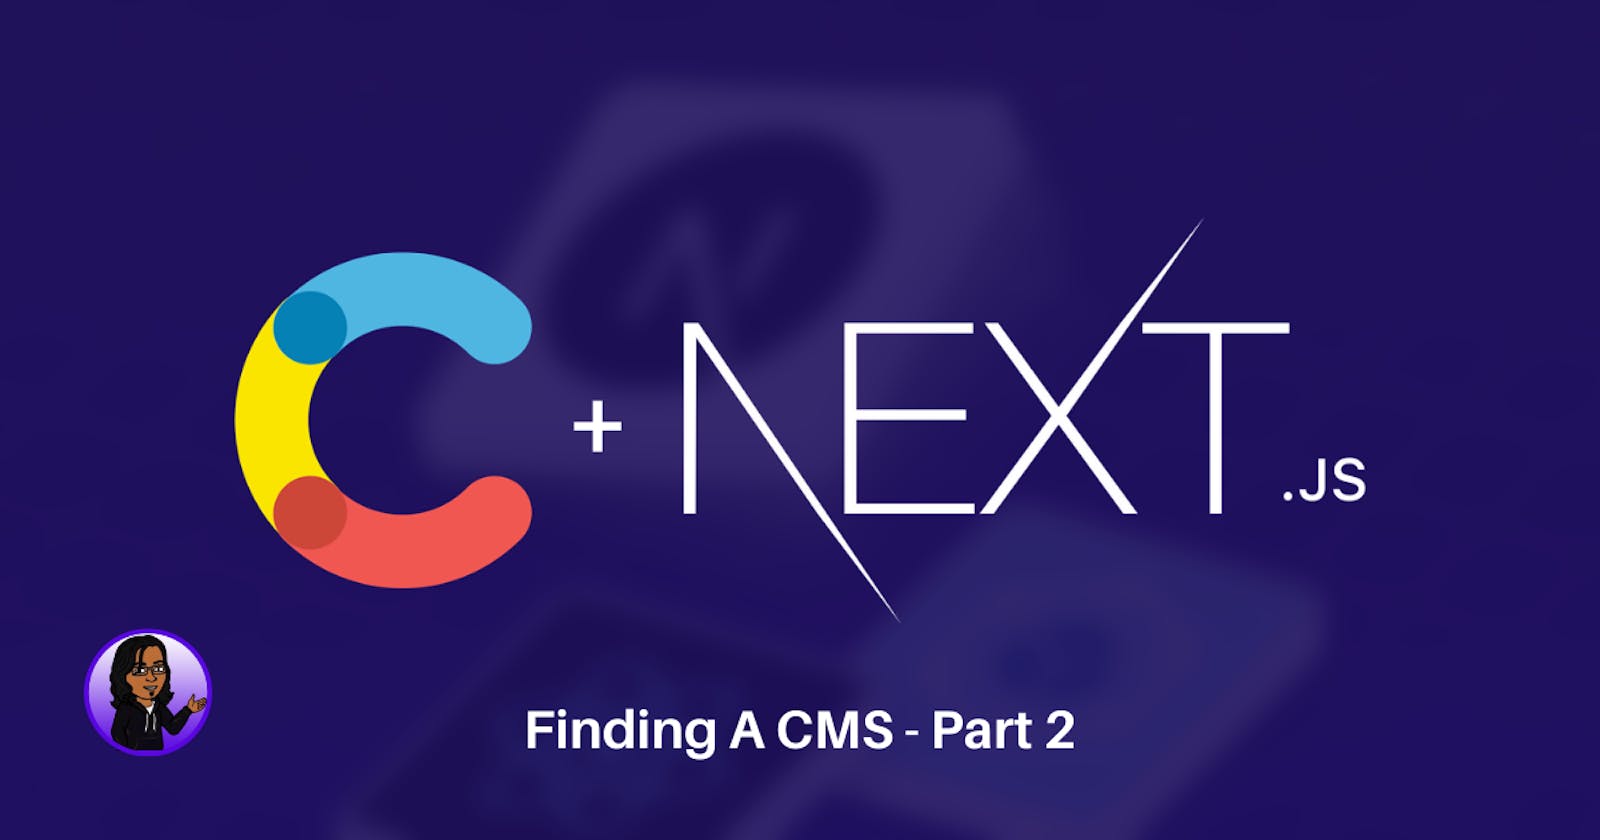 Contentful and NextJS: Finding A CMS Part 2